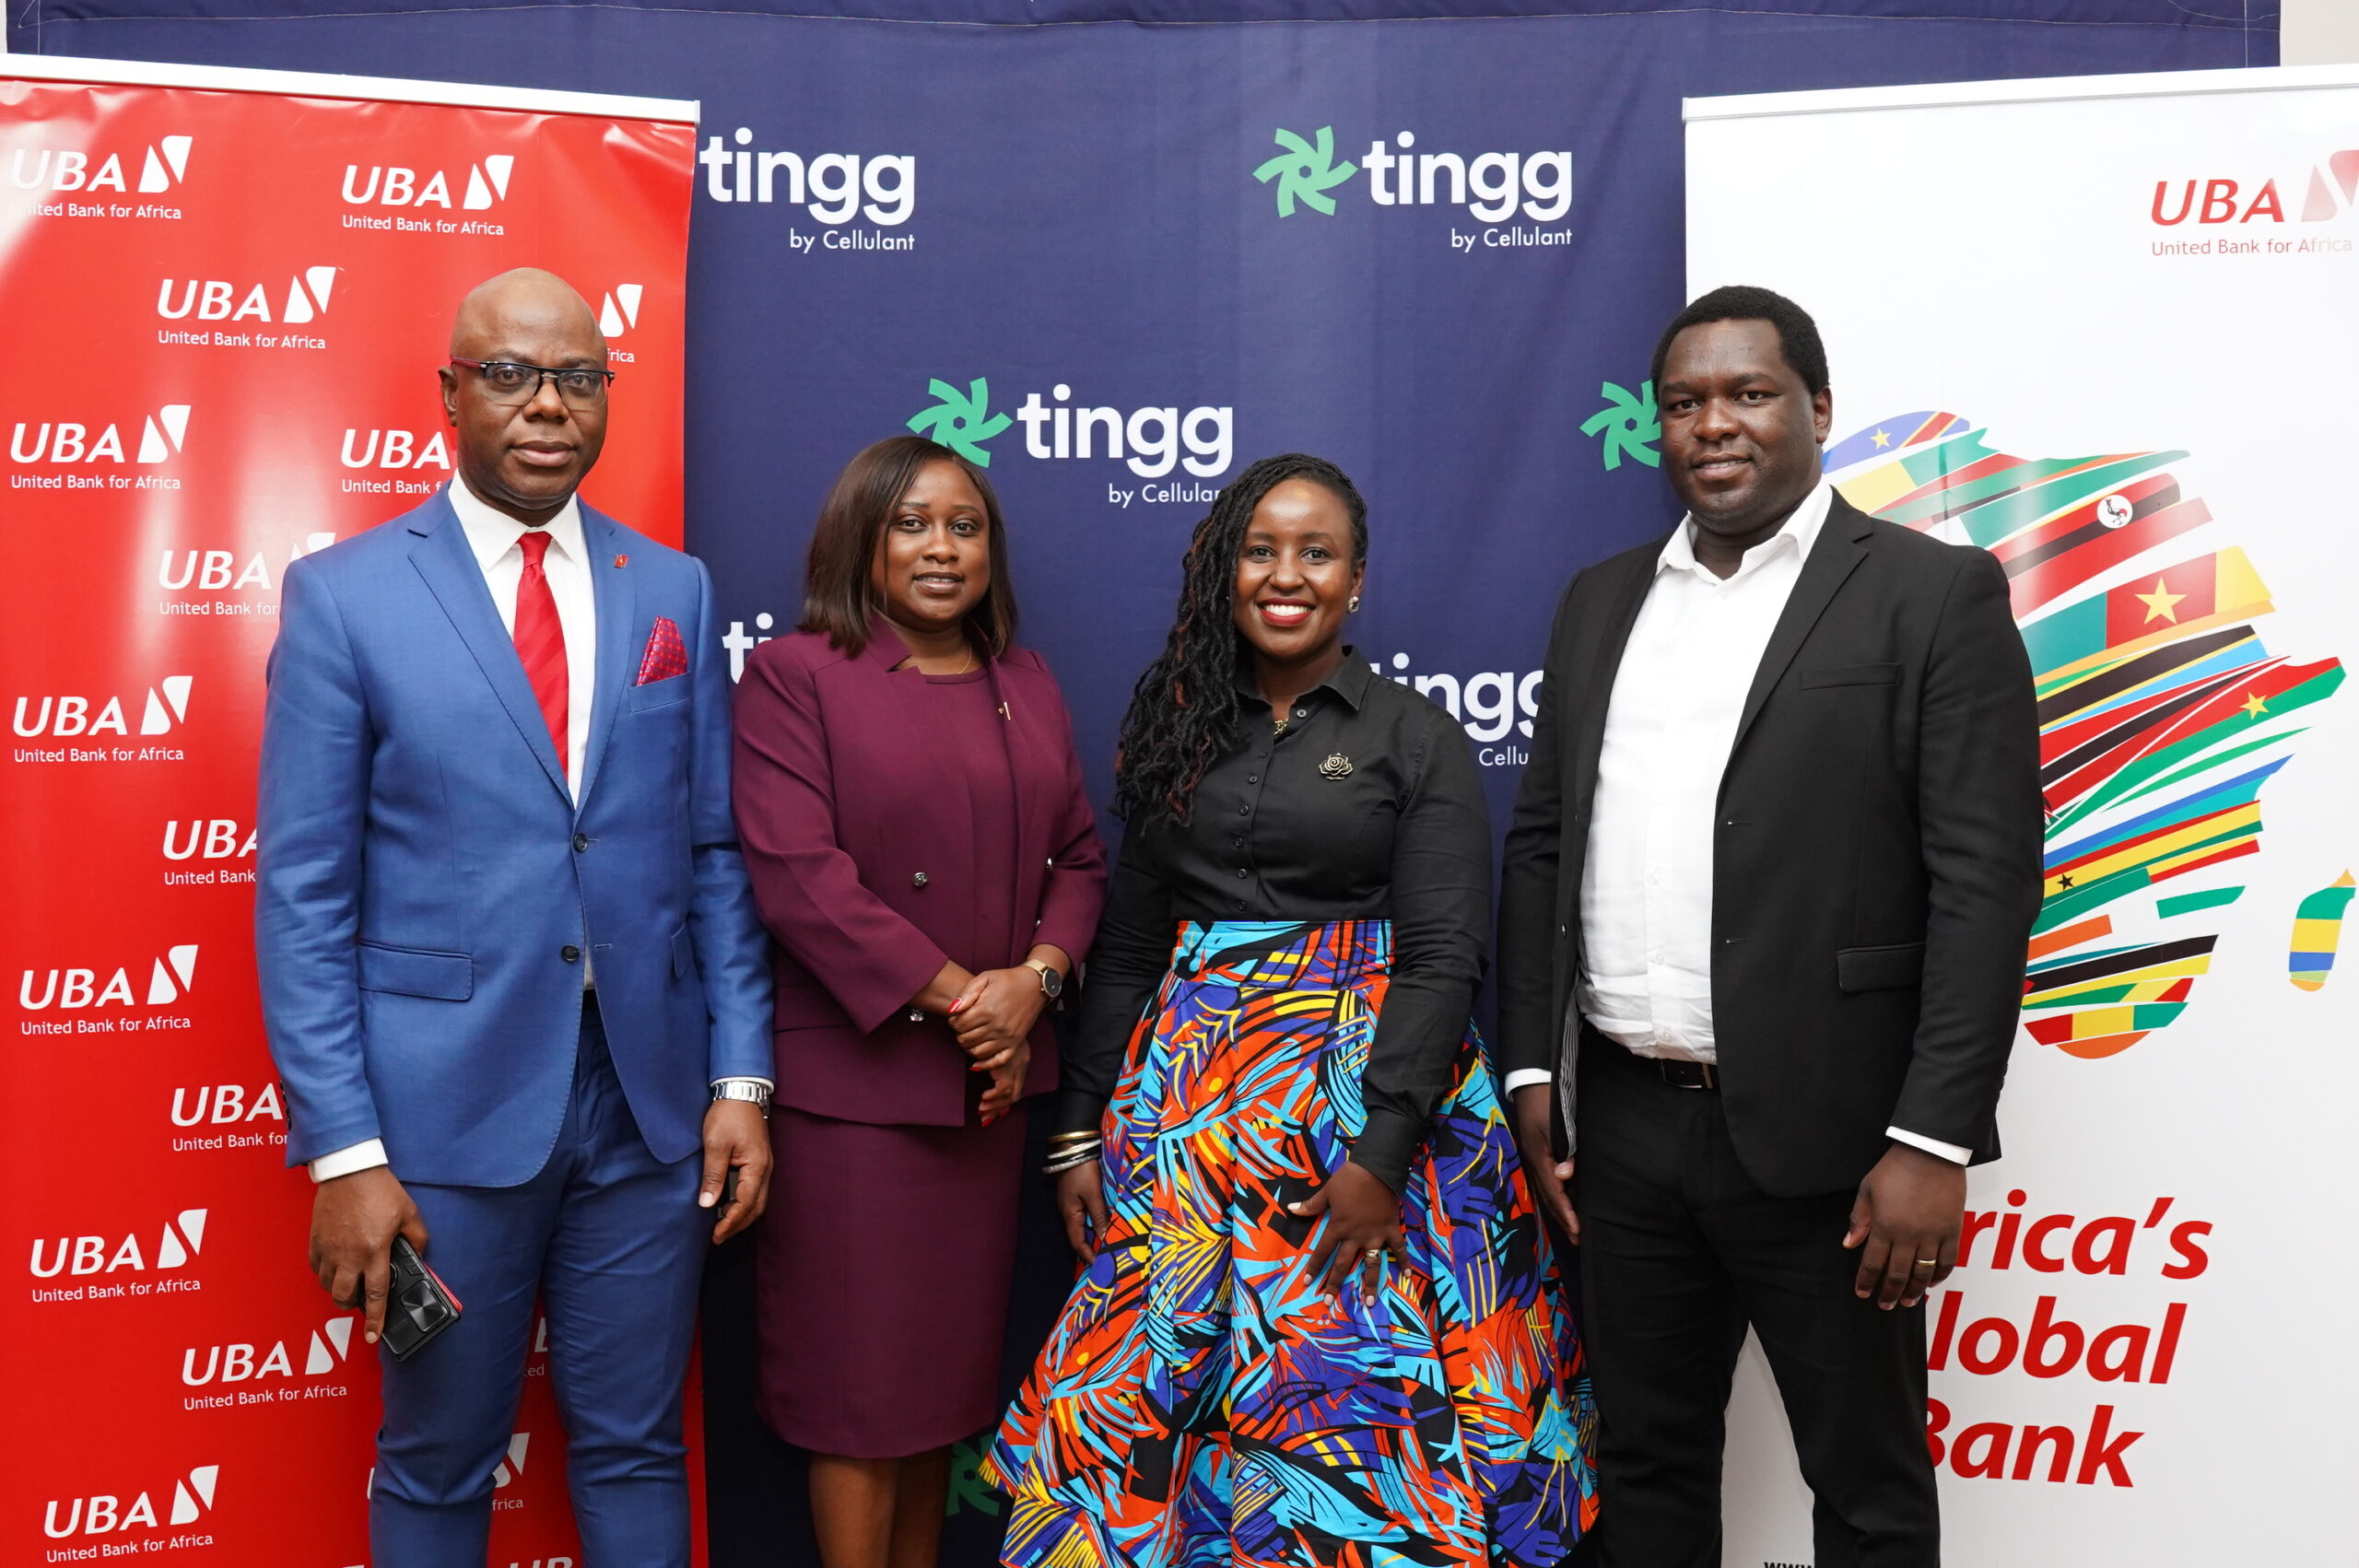 From left to right: Chike Isiuwe, CEO, UBA Kenya, Mary